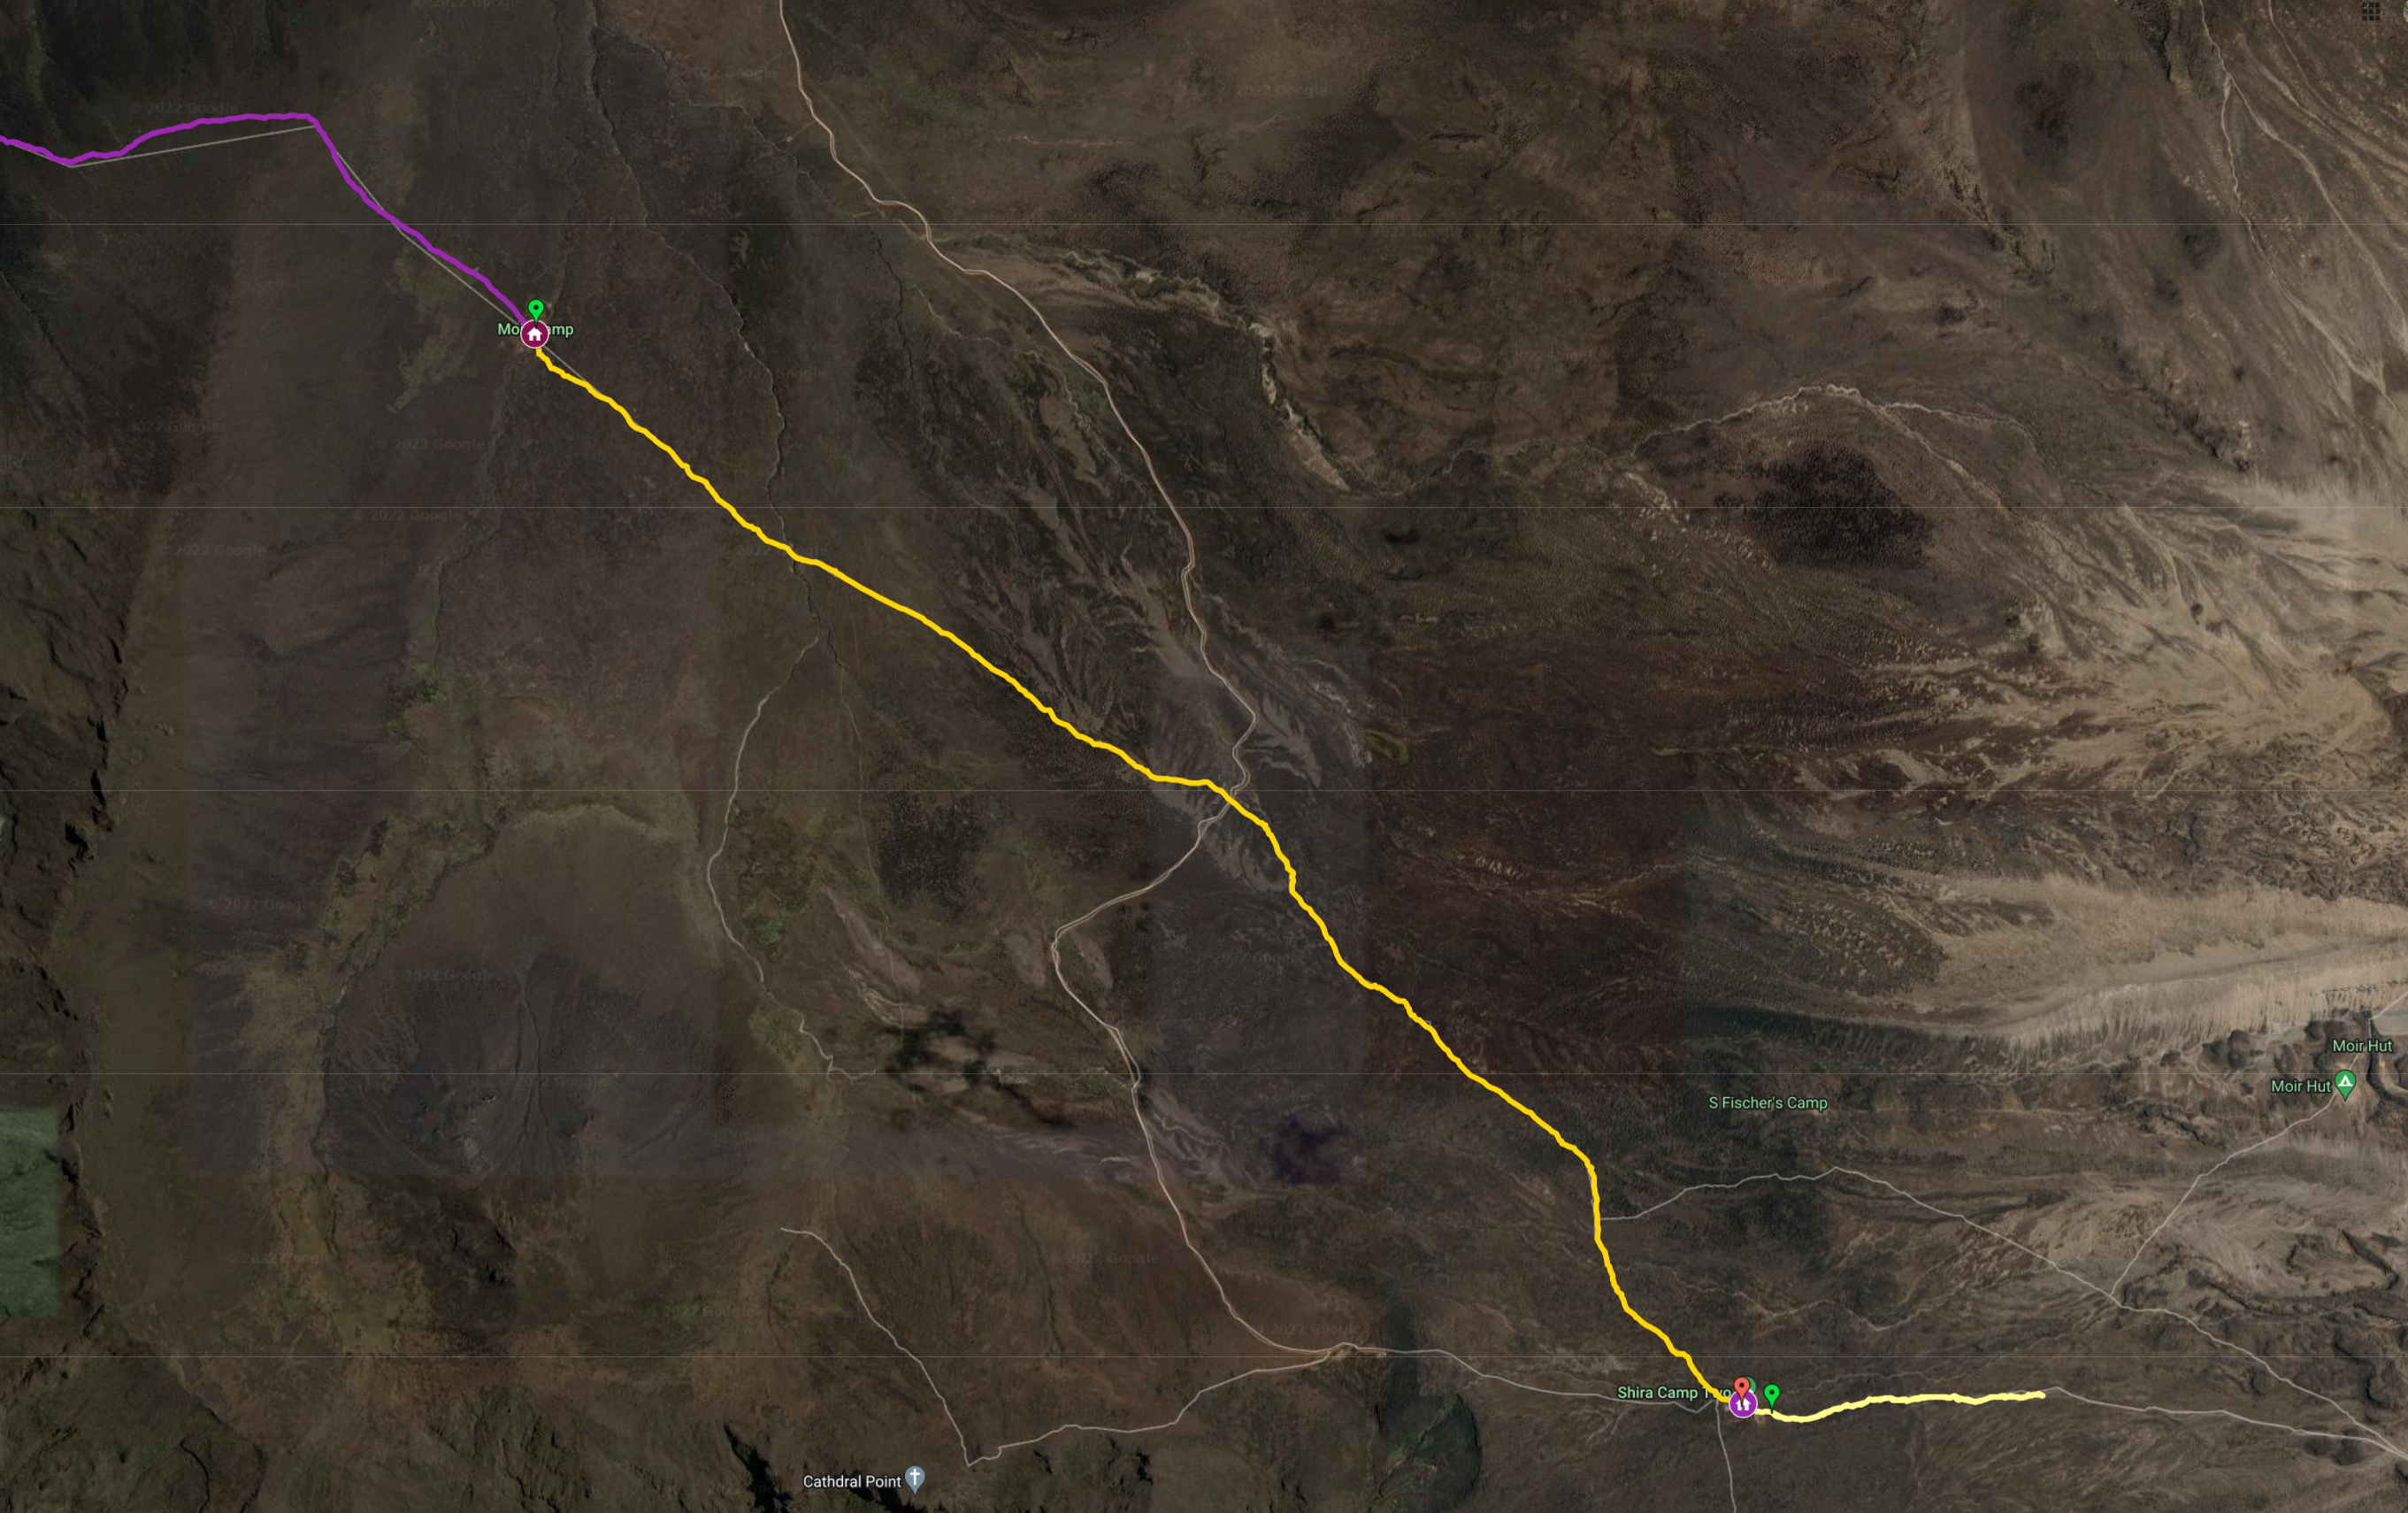 Our Route to Shira Two Camp